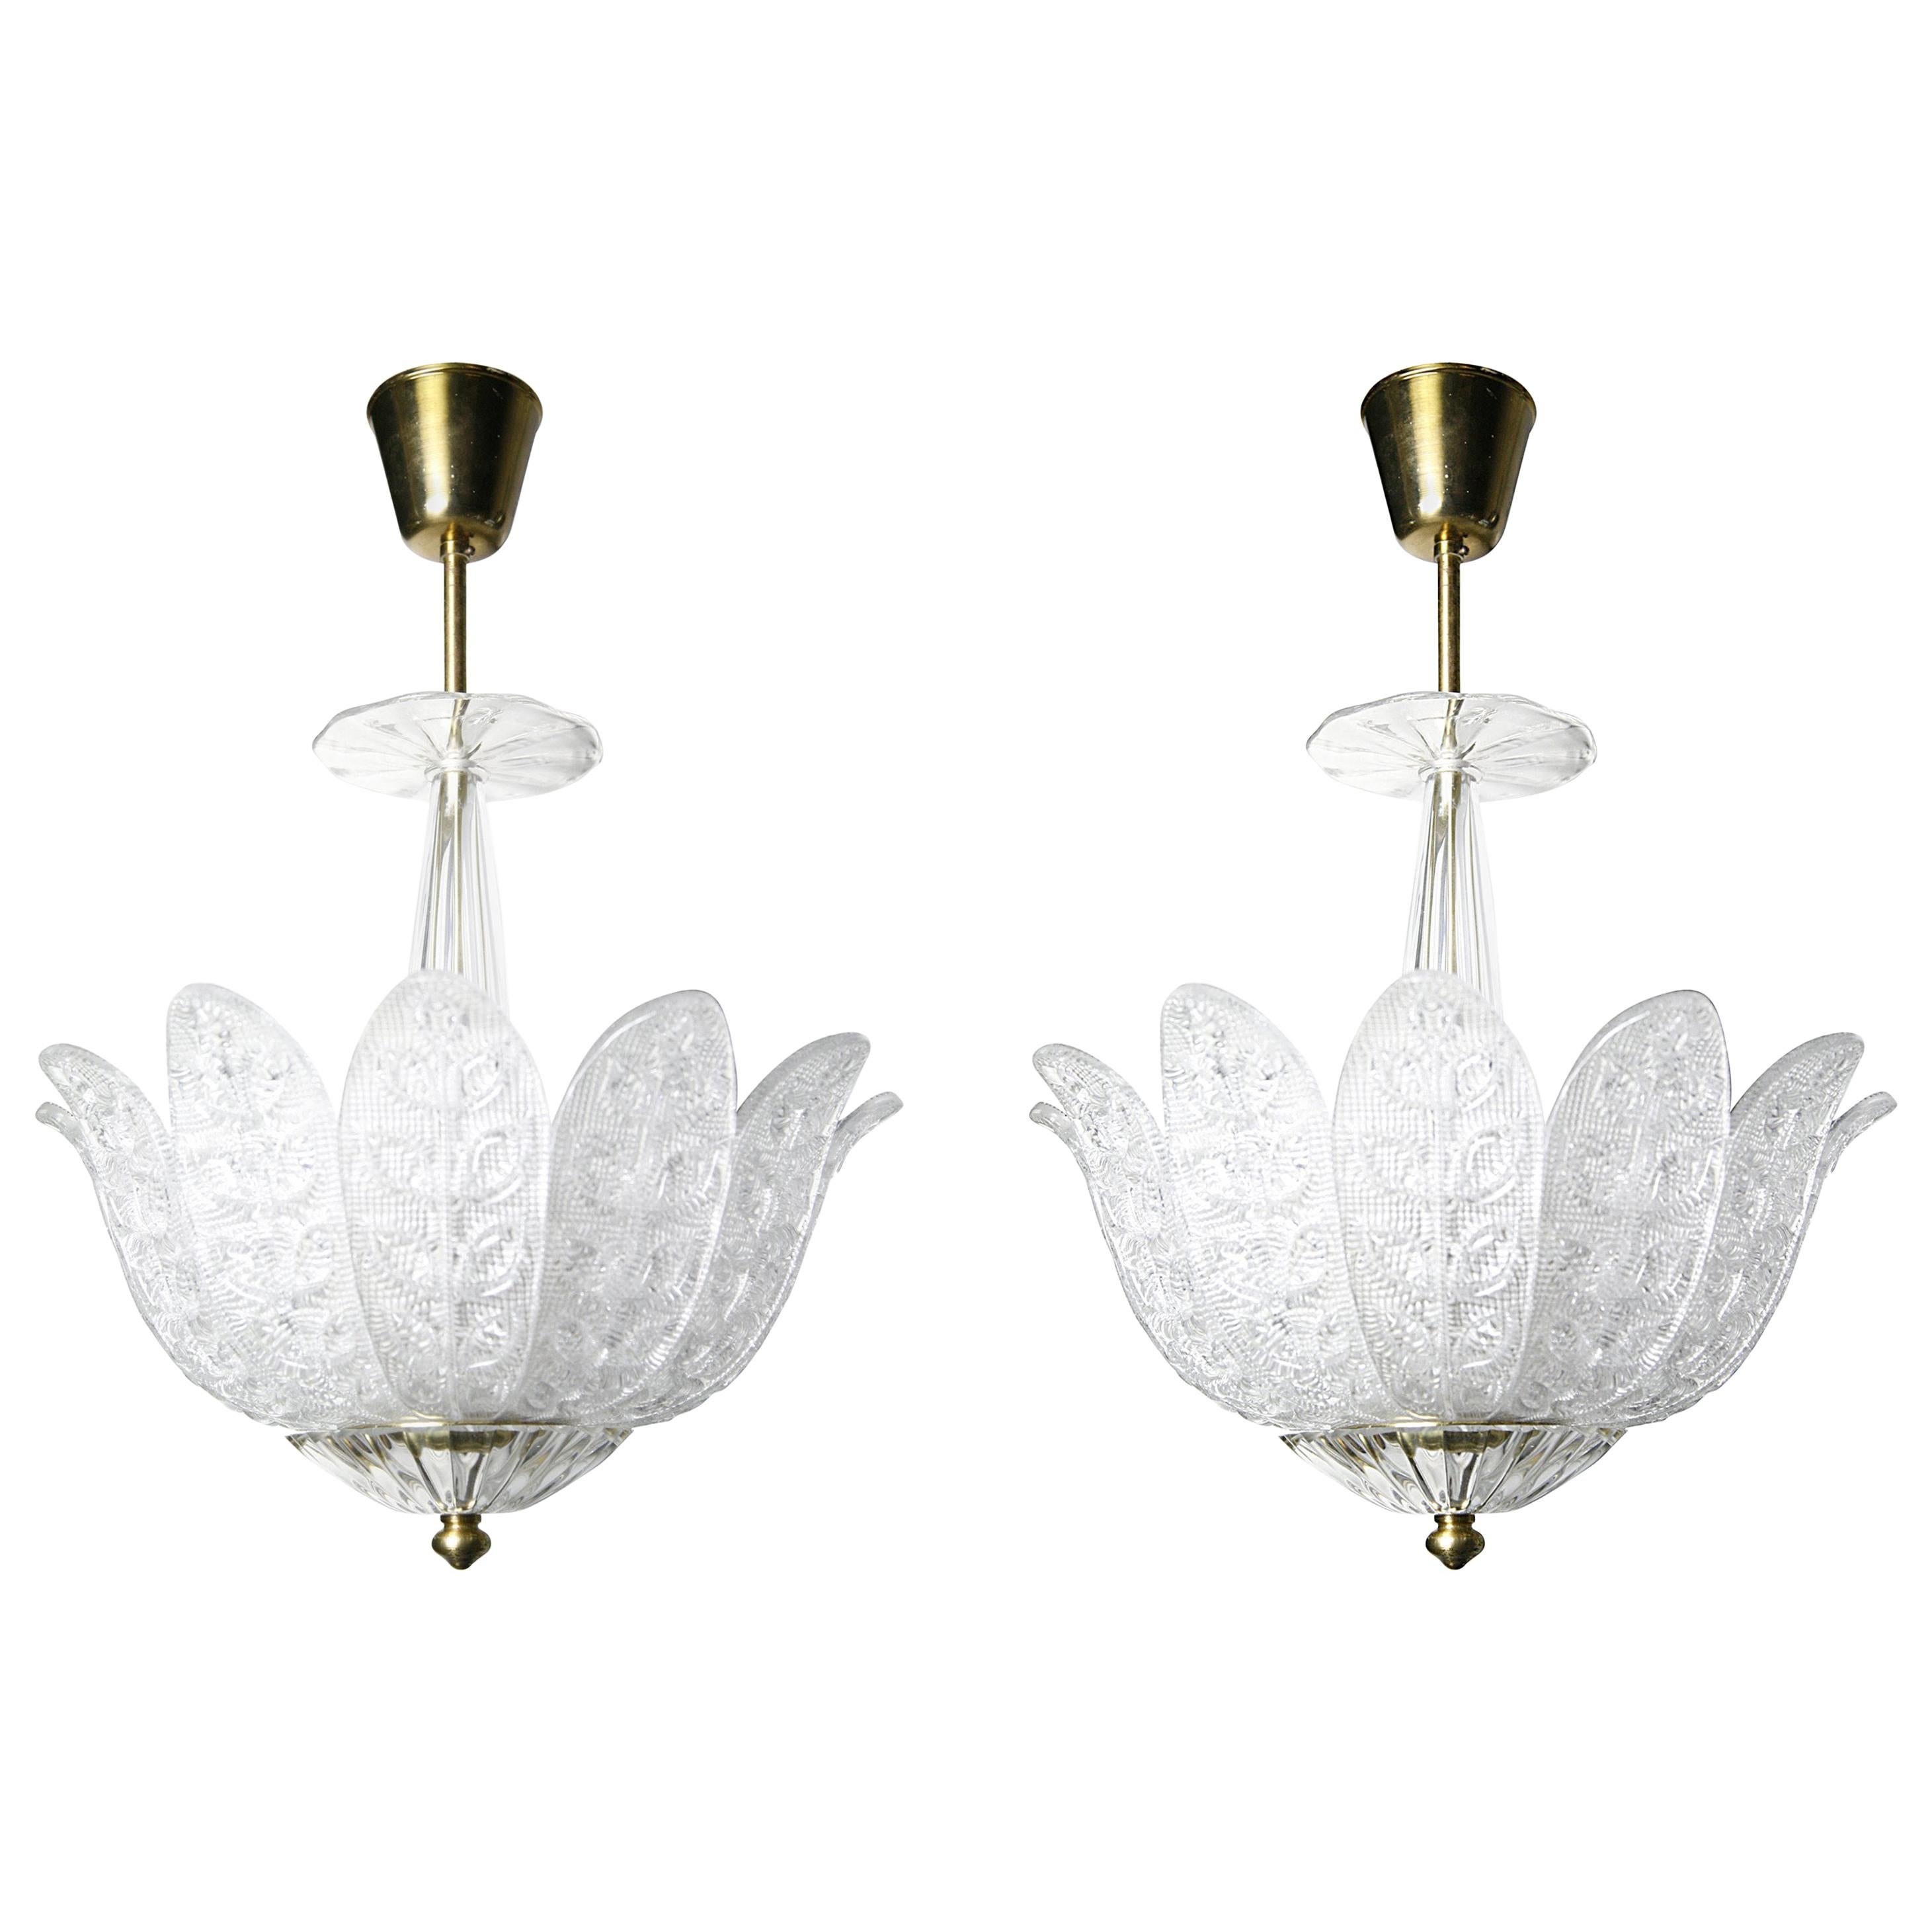 Pair of Orrefors Crystal Chandeliers in the Shape of Leaves, Sweden, 1960 For Sale